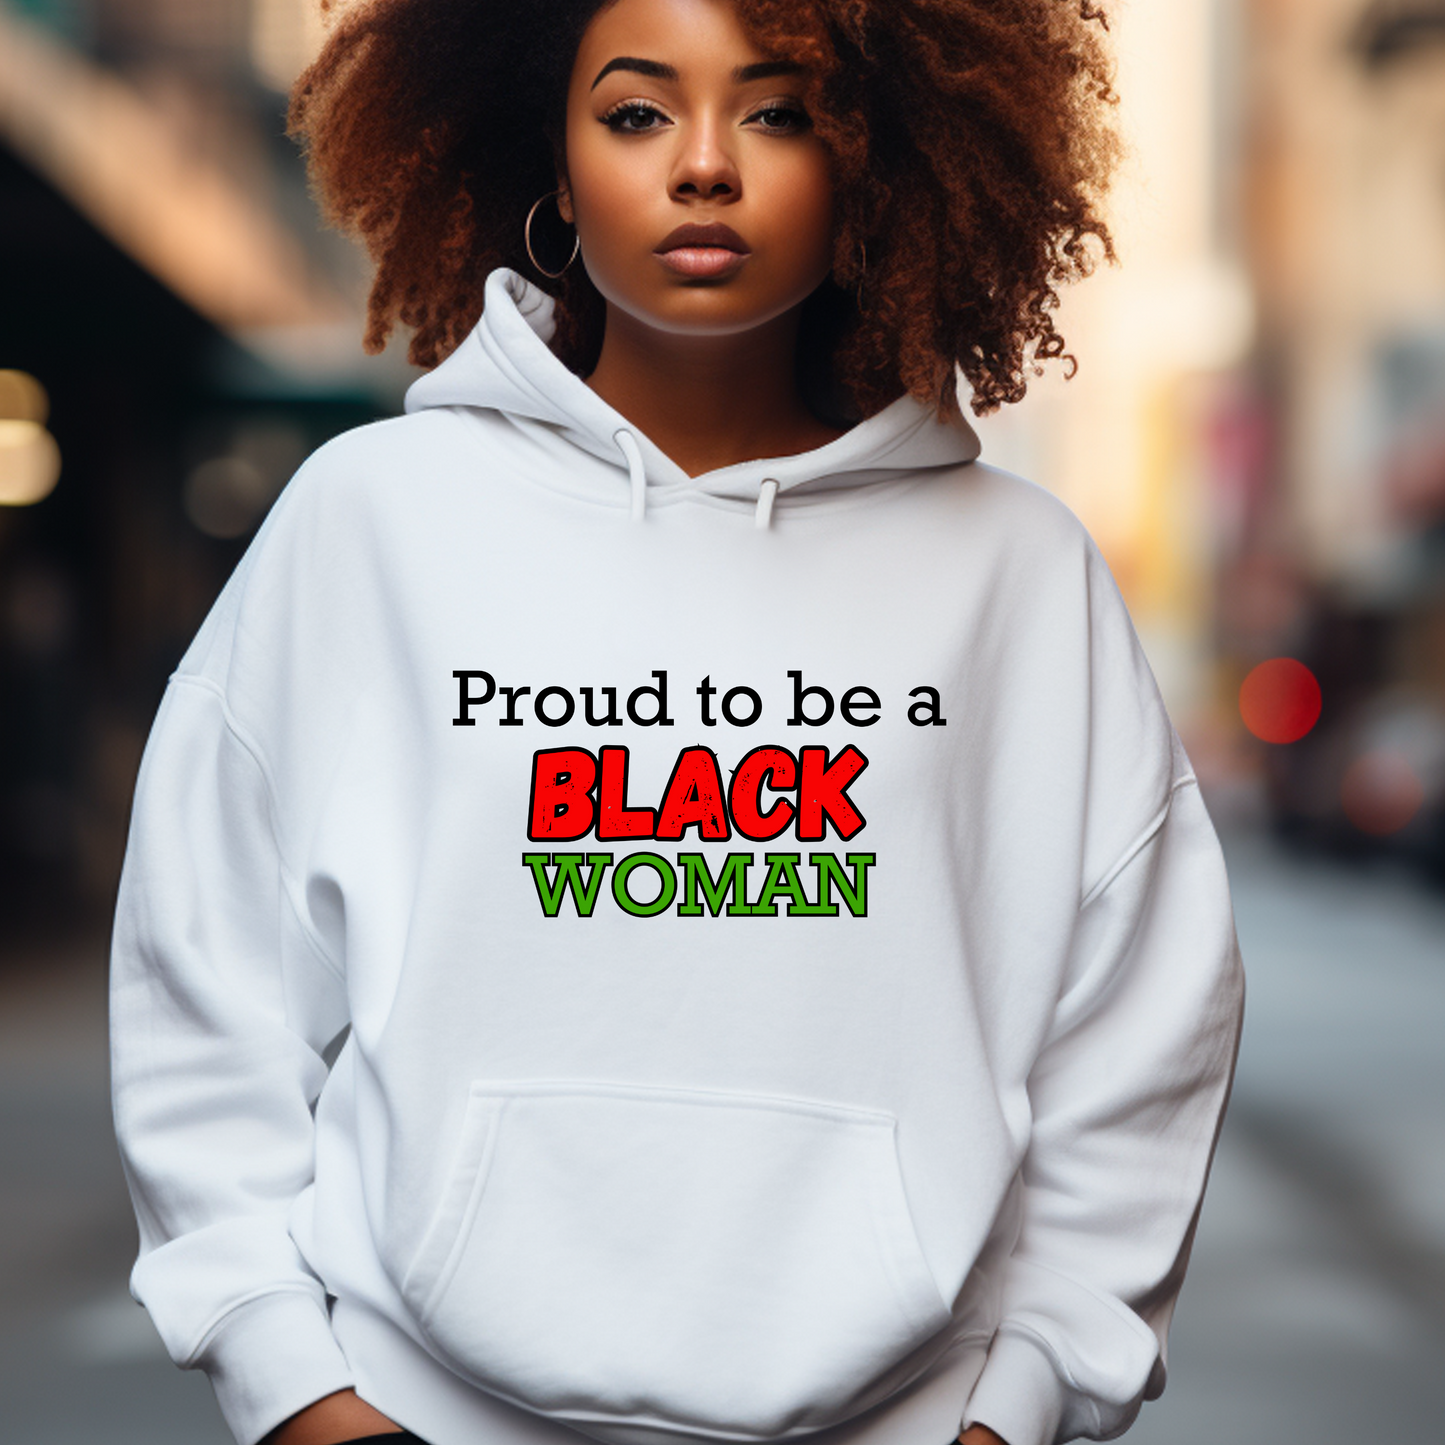 Black Christian Woman Hoodie in White - Embrace Black History with Triumph Tees Faith Fashion. Featuring empowering designs for women. Shop now for stylish faith apparel!